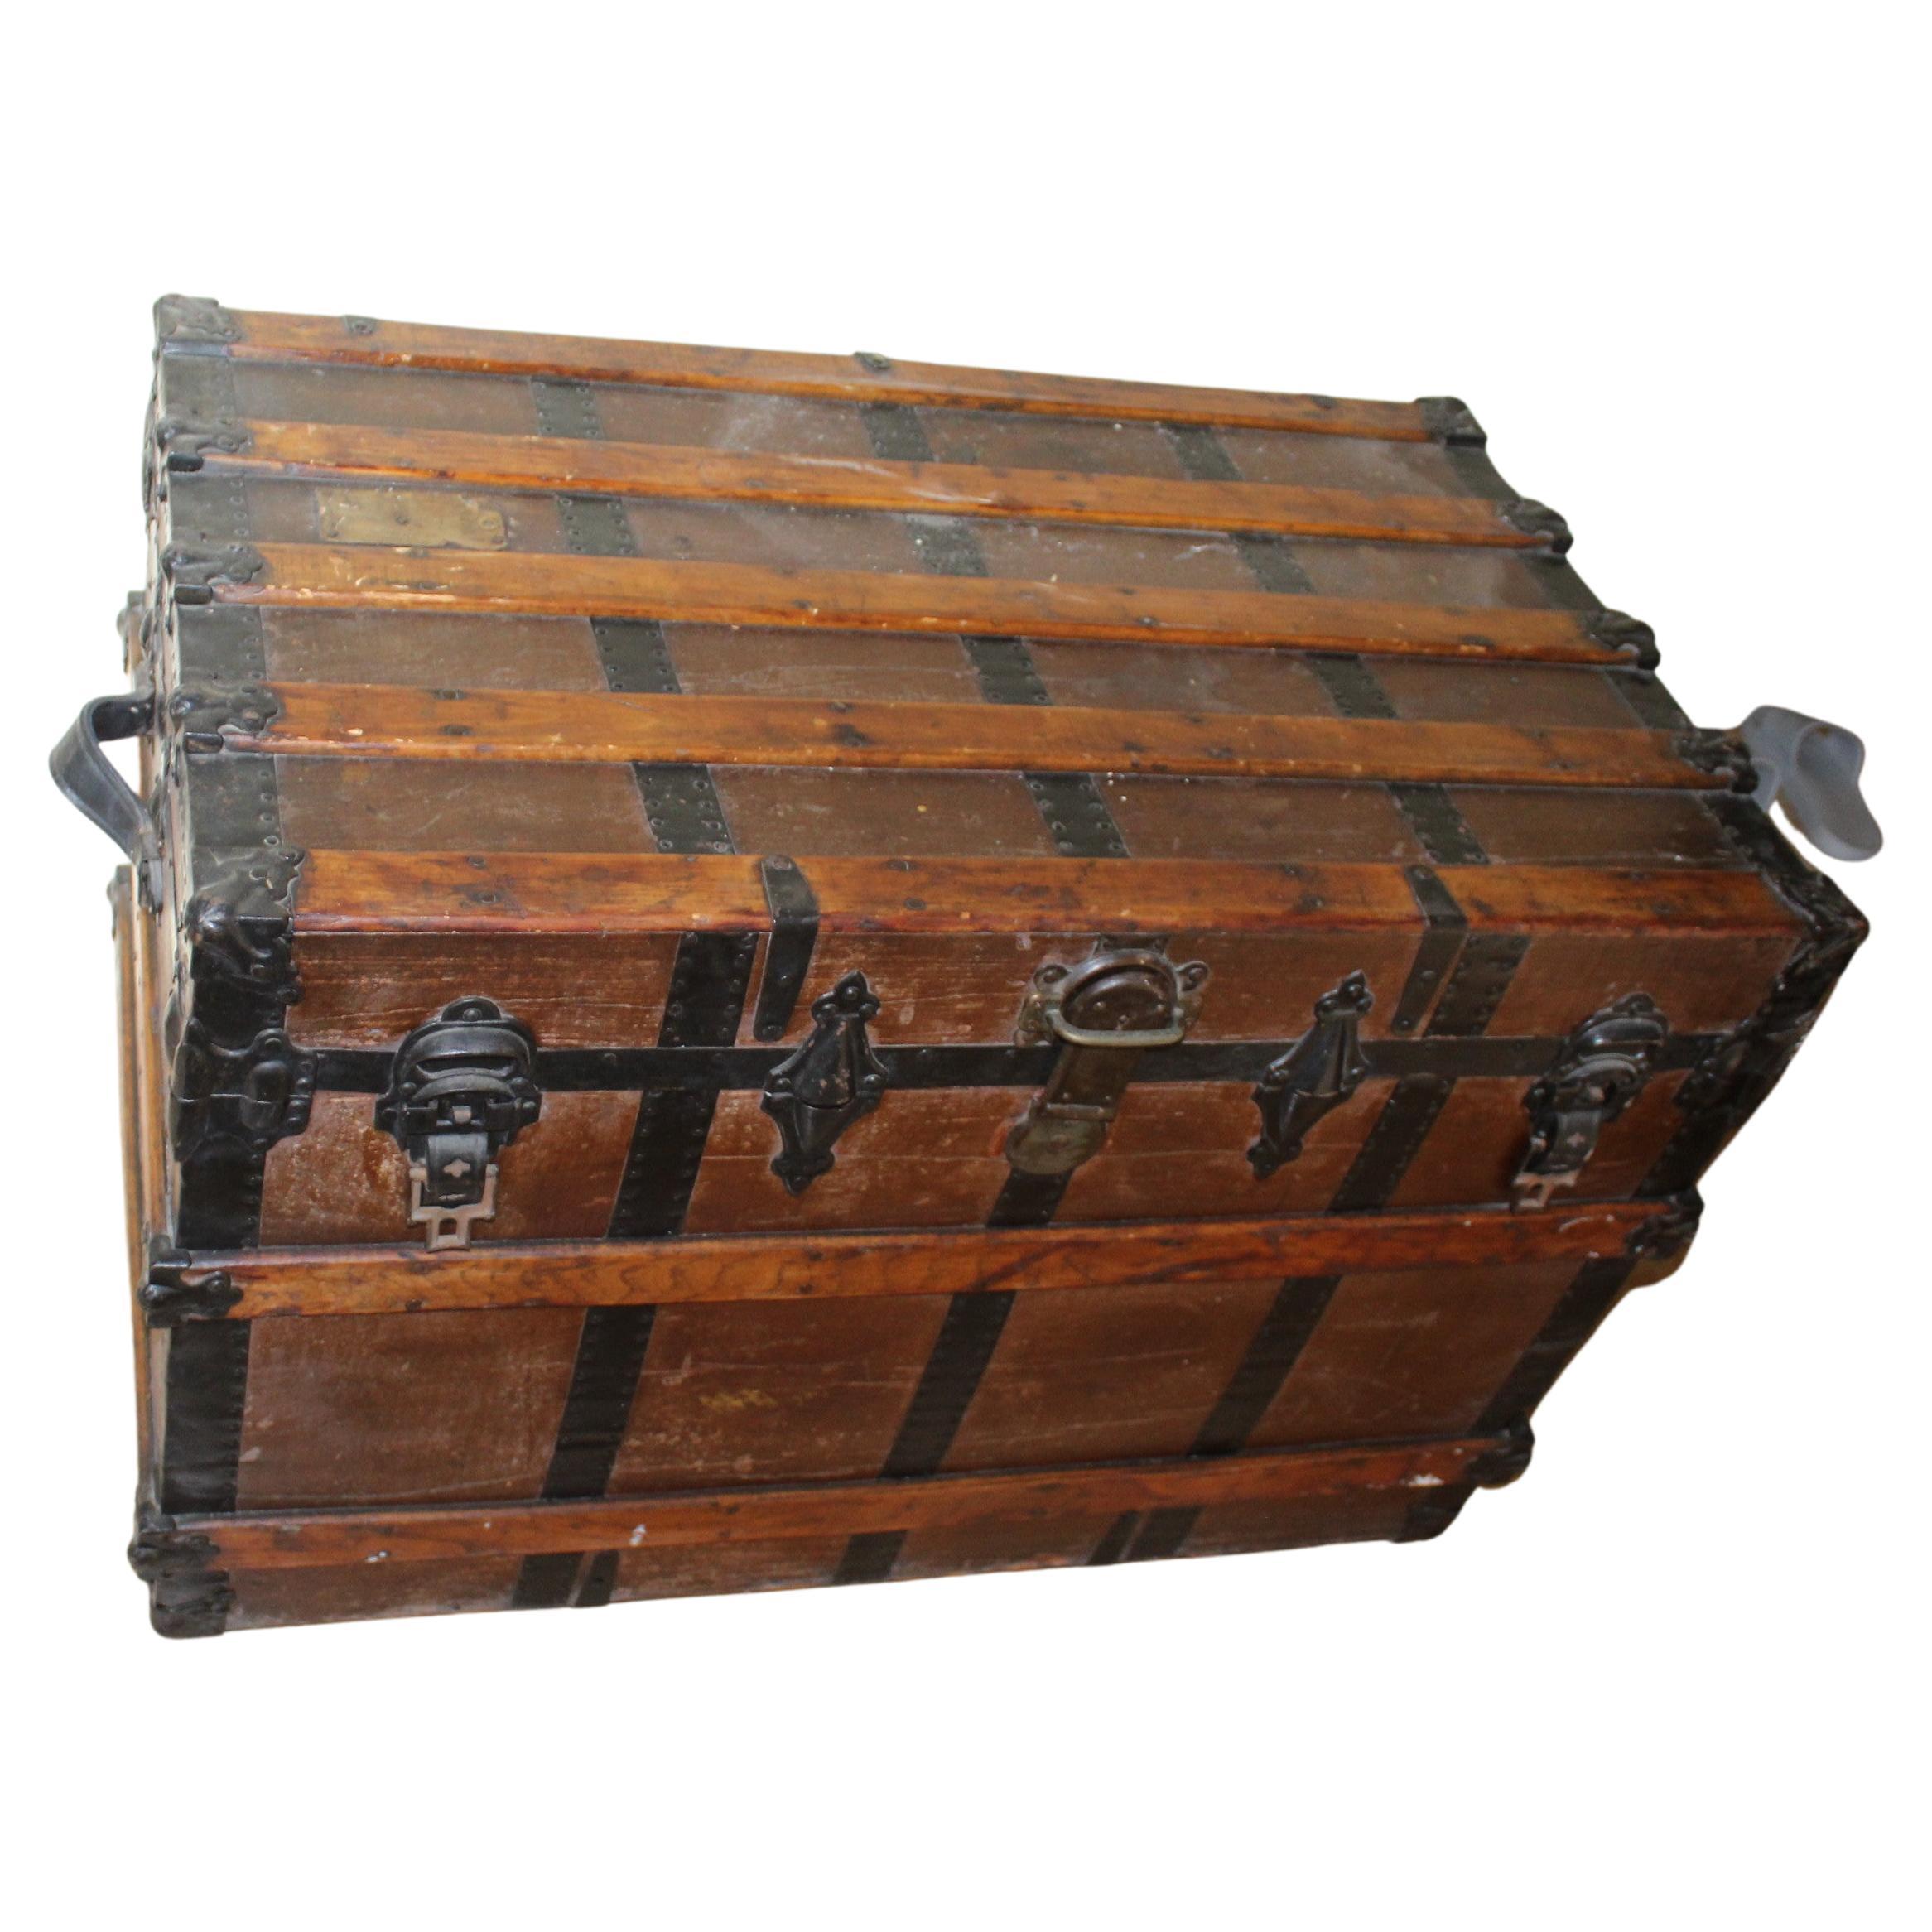 Are old storage trunks worth anything?